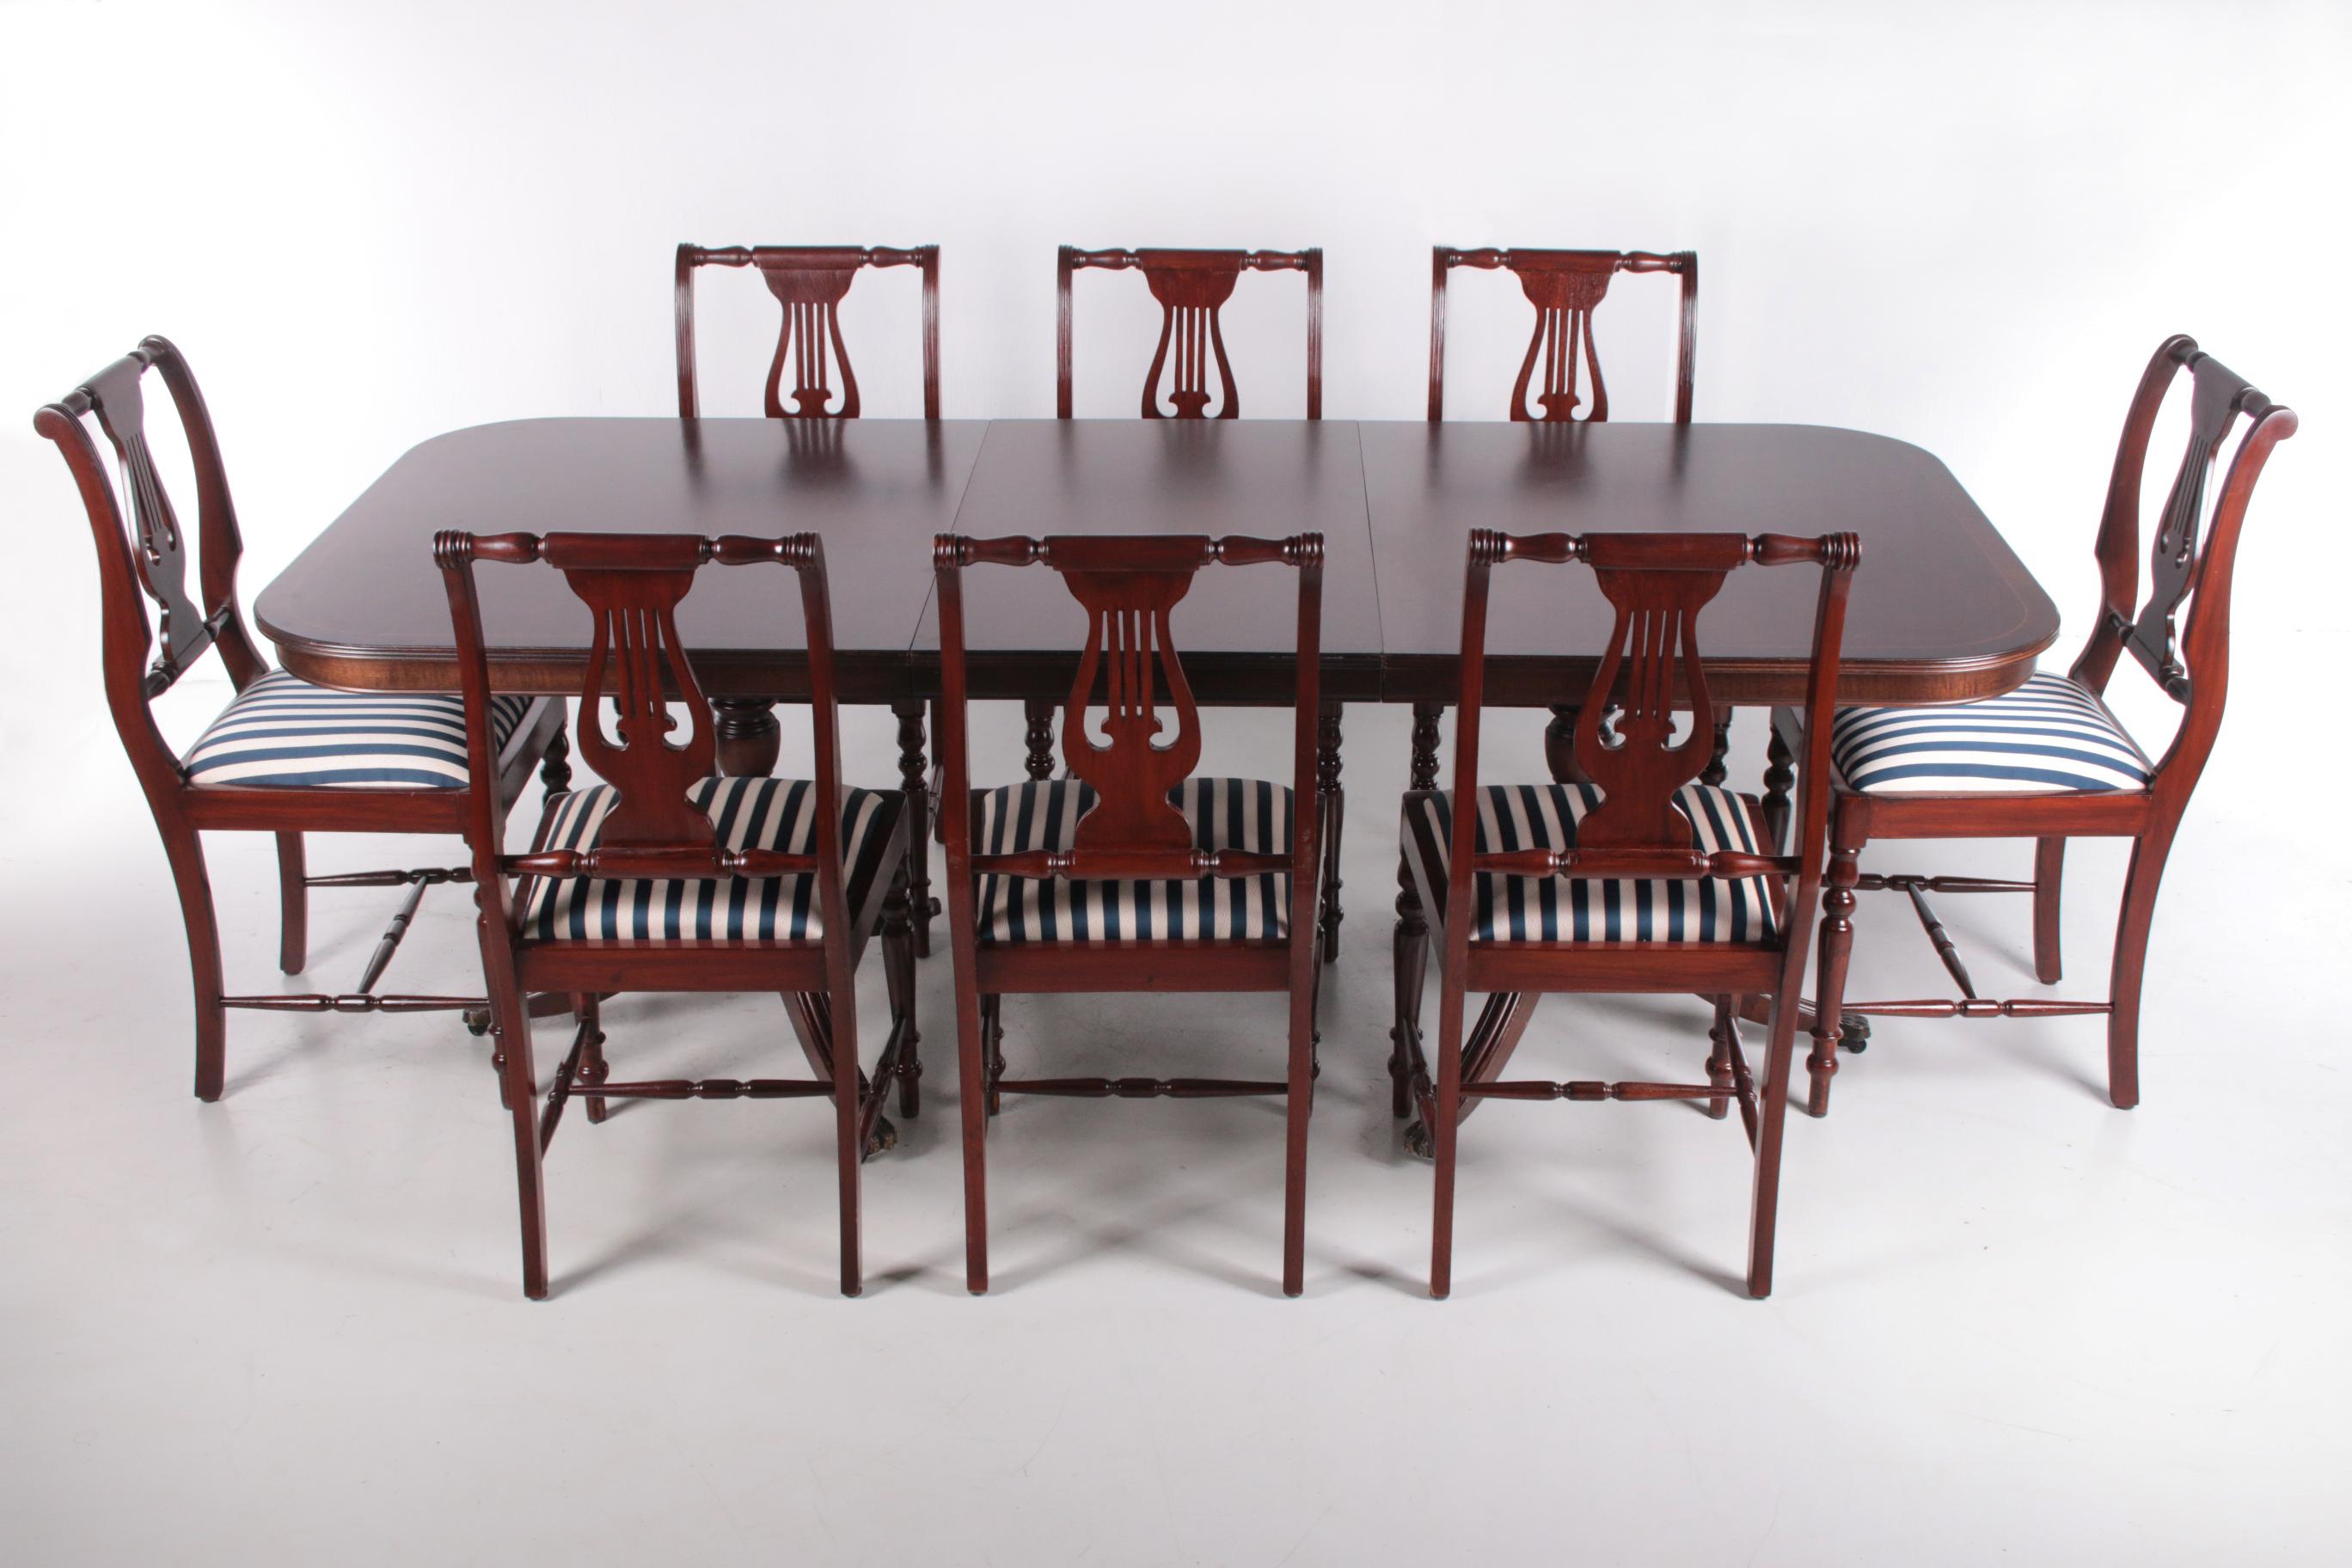 British Queen Anne Style English Mahogany Dining Set with 8 Chairs, 1980s